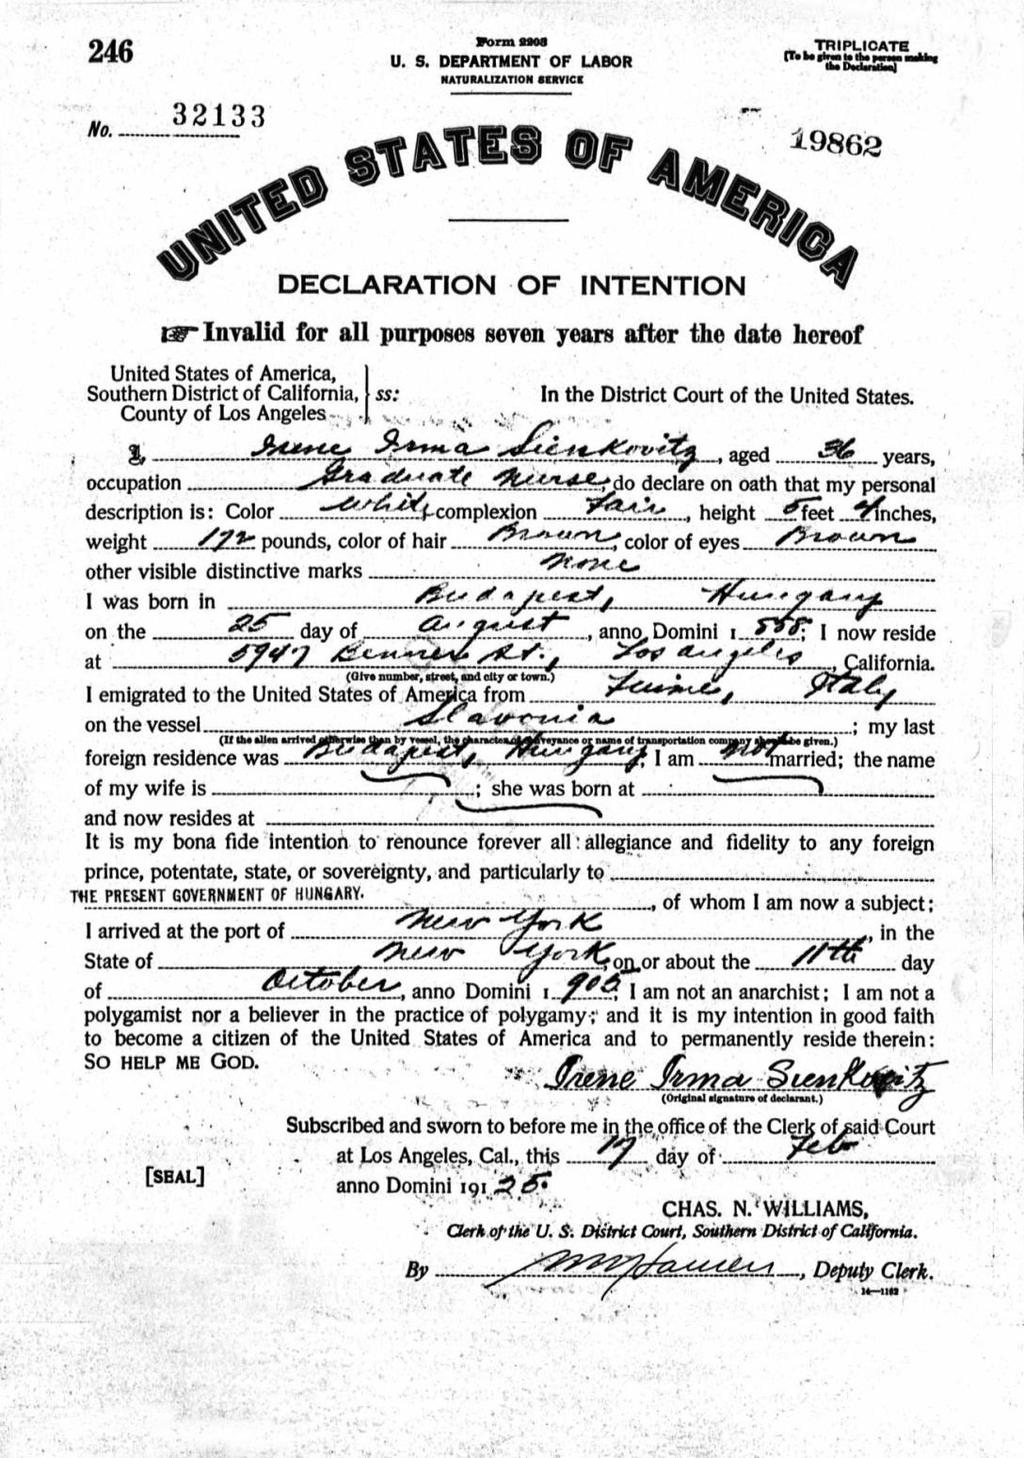 Irene Irma Sienkovitz's Declaration of Intention, 17 February 1925 Irene is also shown in the Los Angeles, California 1930 Federal Census as "Widow", with a female, Miriam Westberg, age 10, living